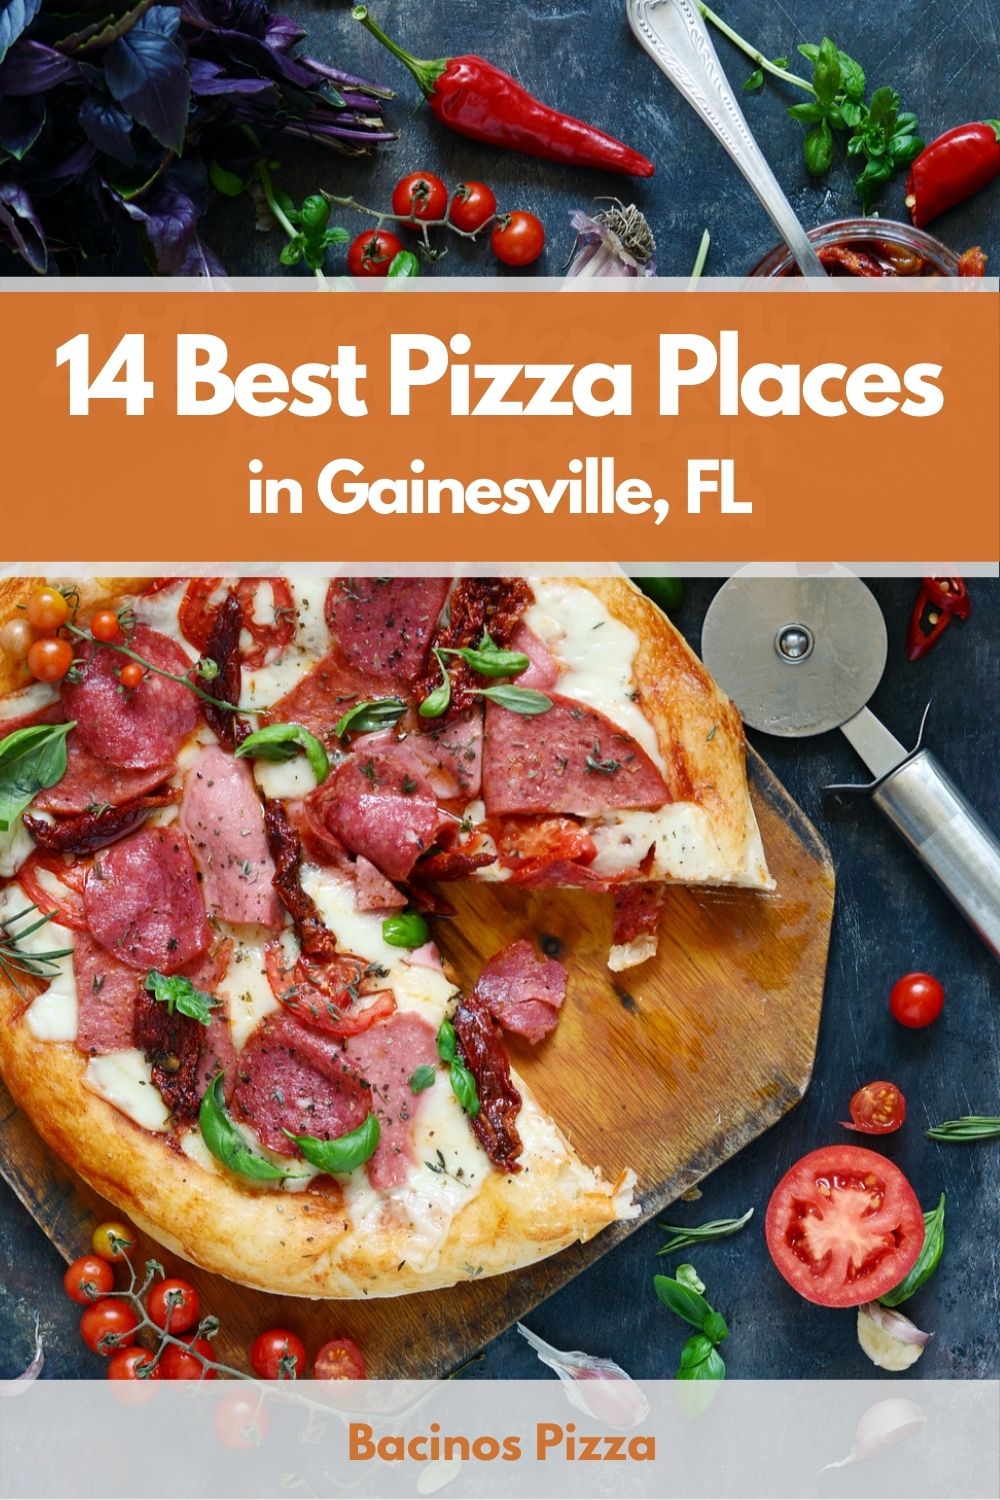 14 Best Pizza Places in Gainesville, FL pin 2